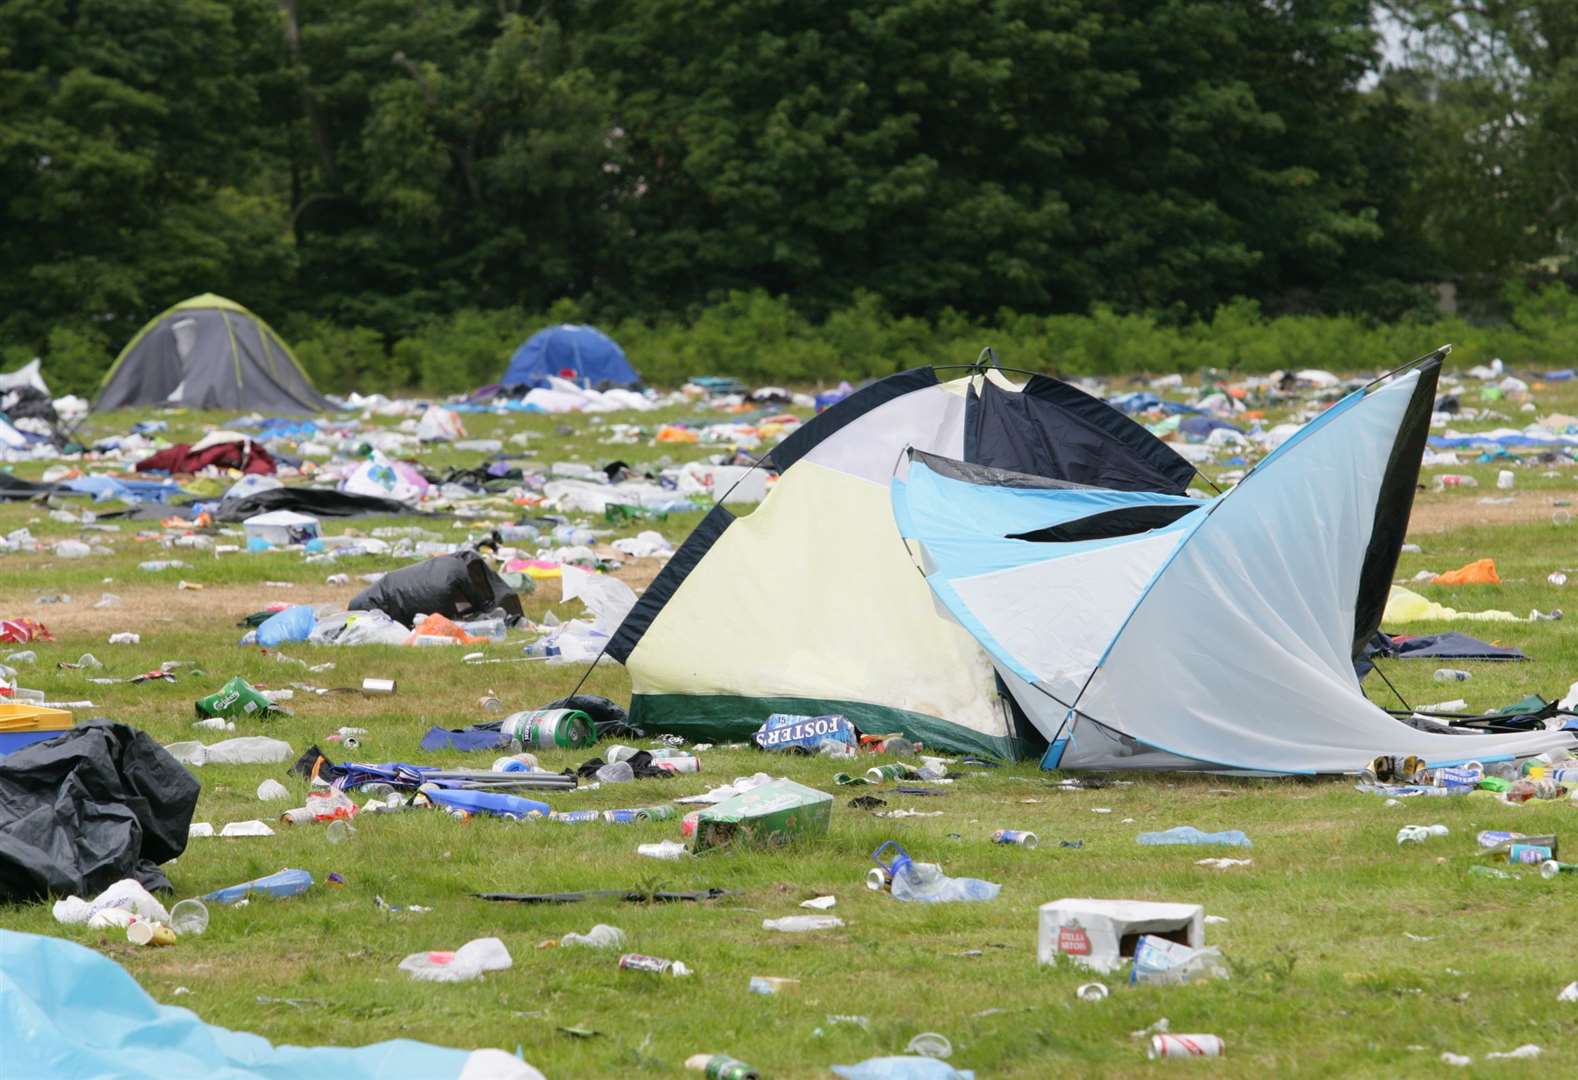 The scene of Zoo8 after the ill-fated festival finally took place